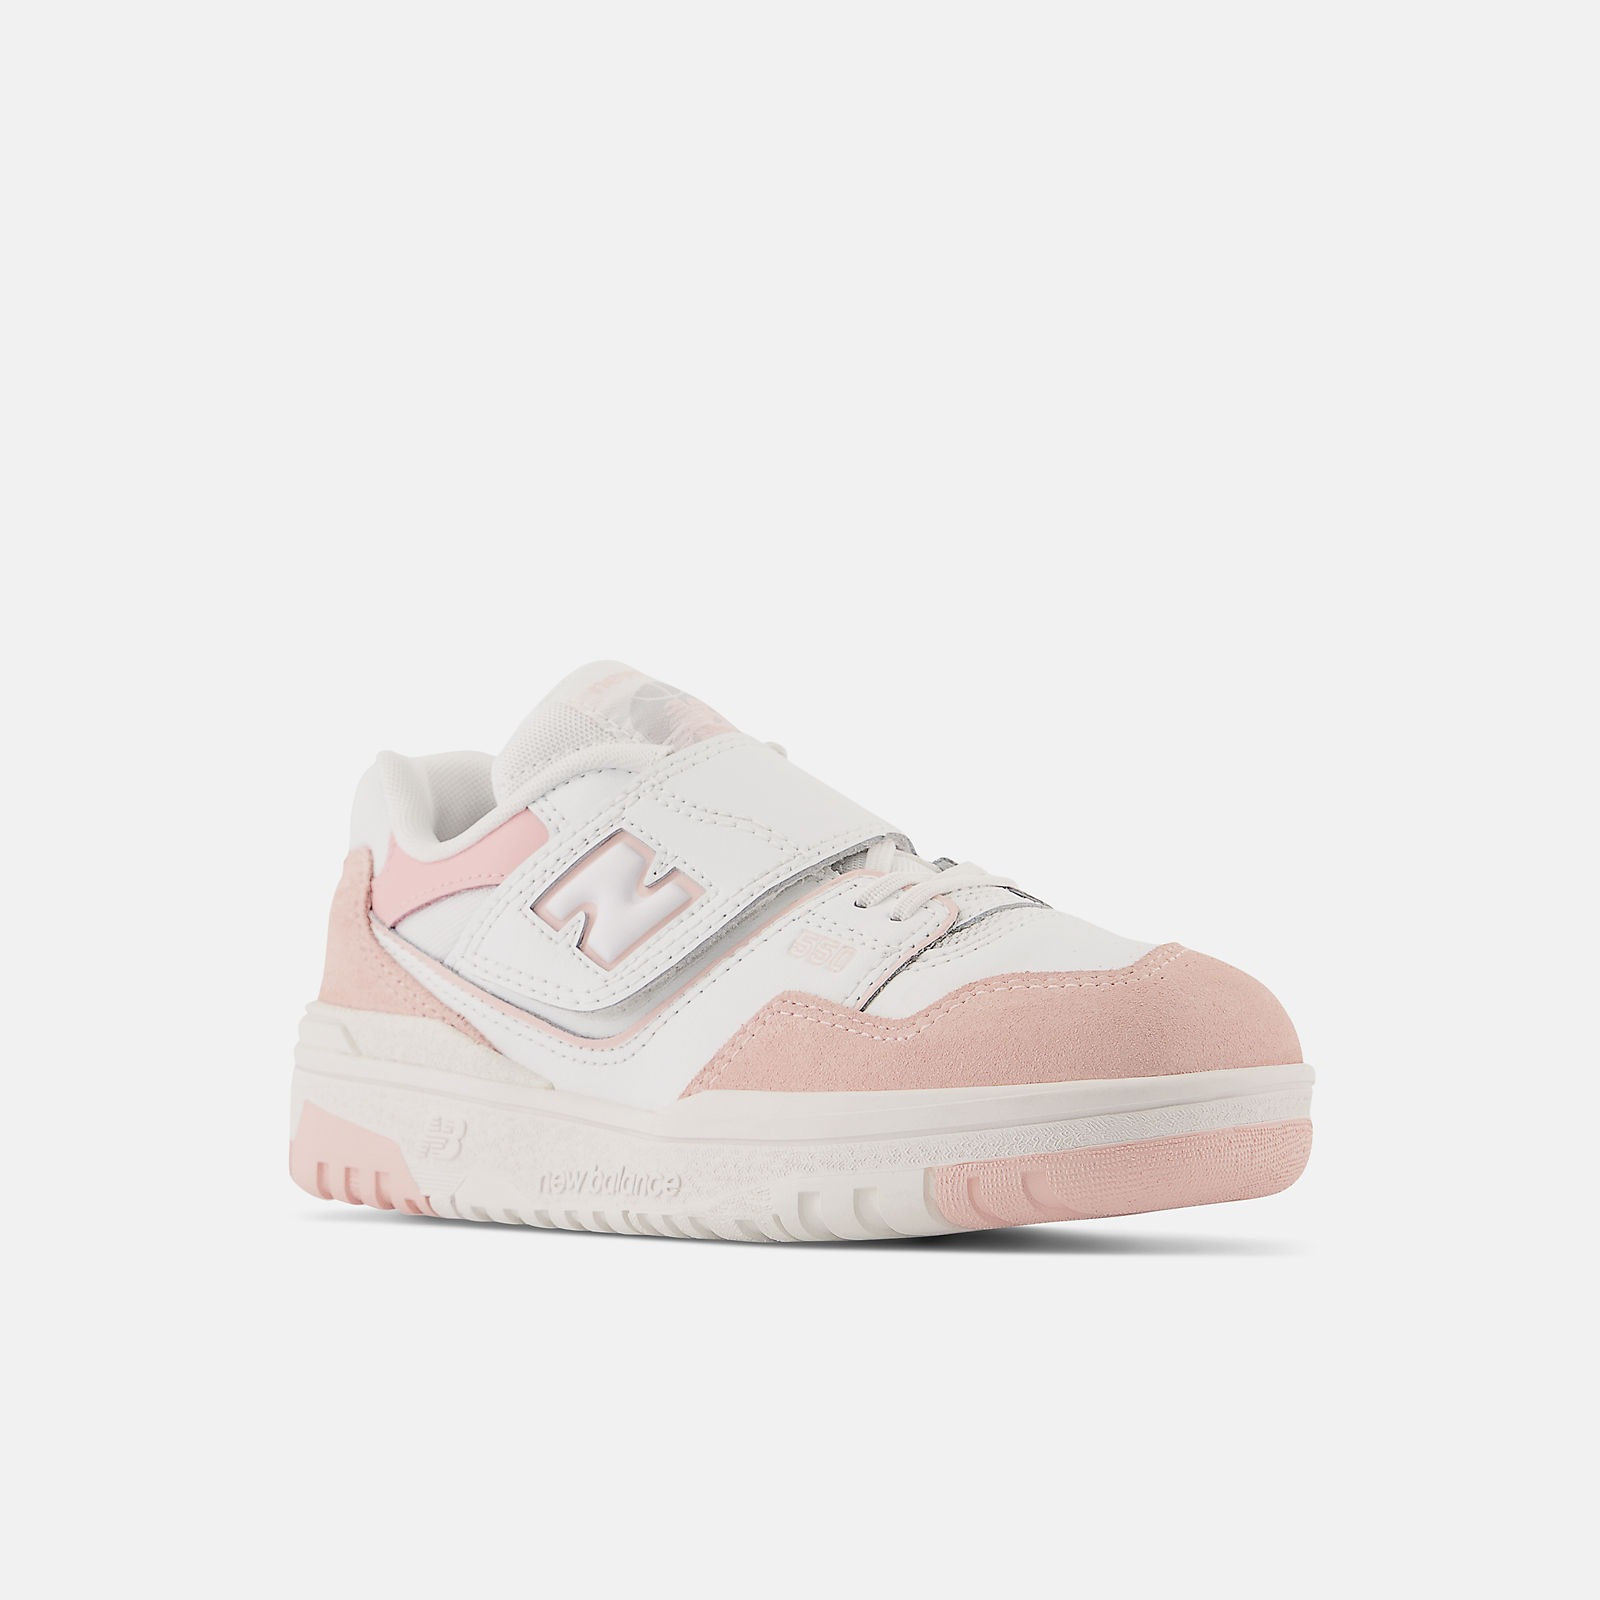 New Balance 550 PS shoes for children (Girls 28 to 35) - White/Pink - PHB550CD